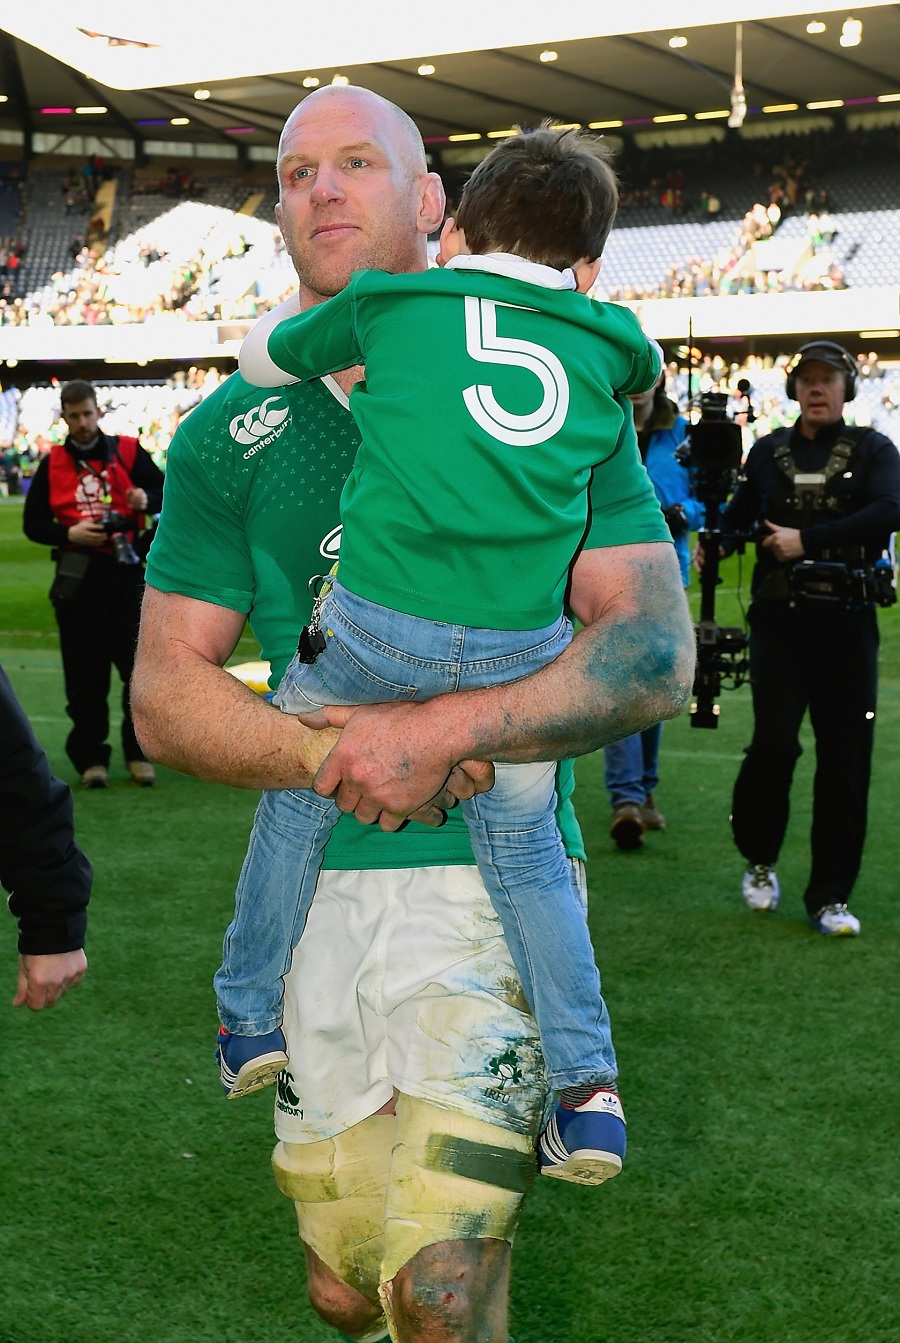 Paul O'Connell celebrates victory with his son